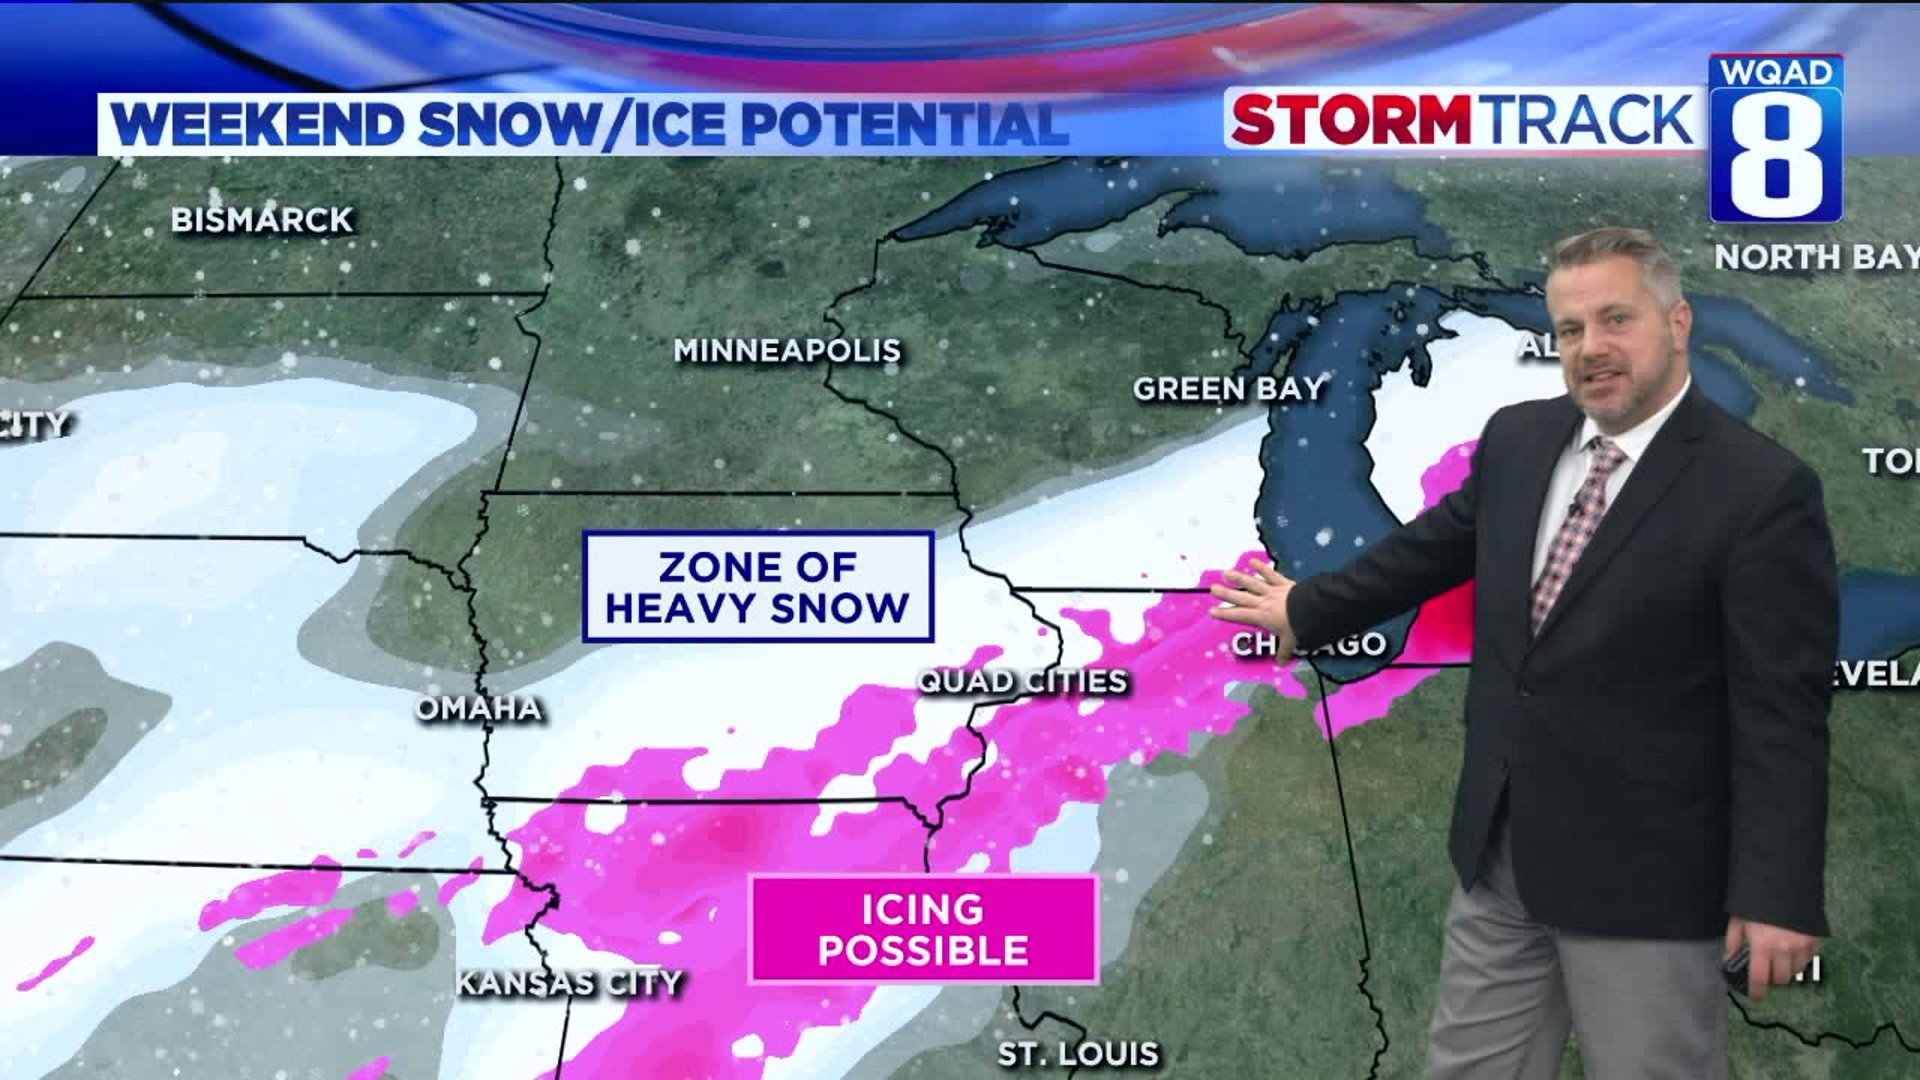 Eric pinpoints where ice and snow are possible this weekend